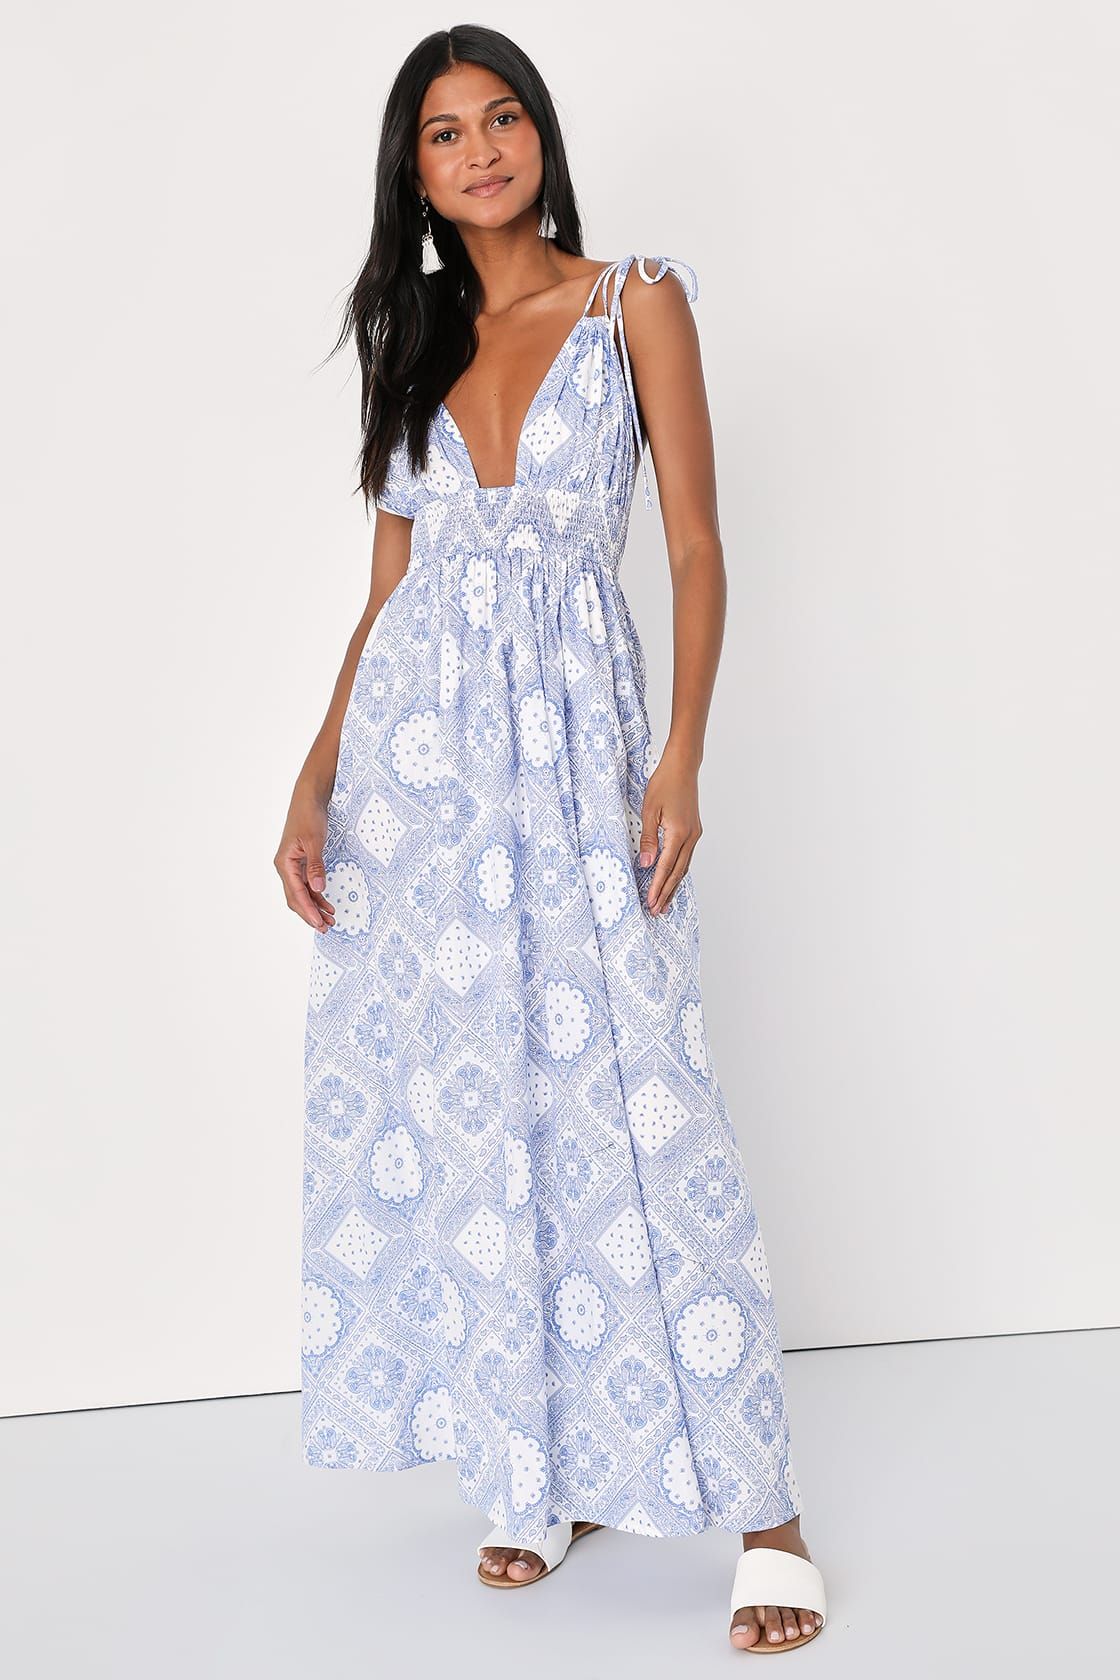 Spanish Sojourn White and Blue Paisley Tie-Strap Maxi Dress | Lulus (US)